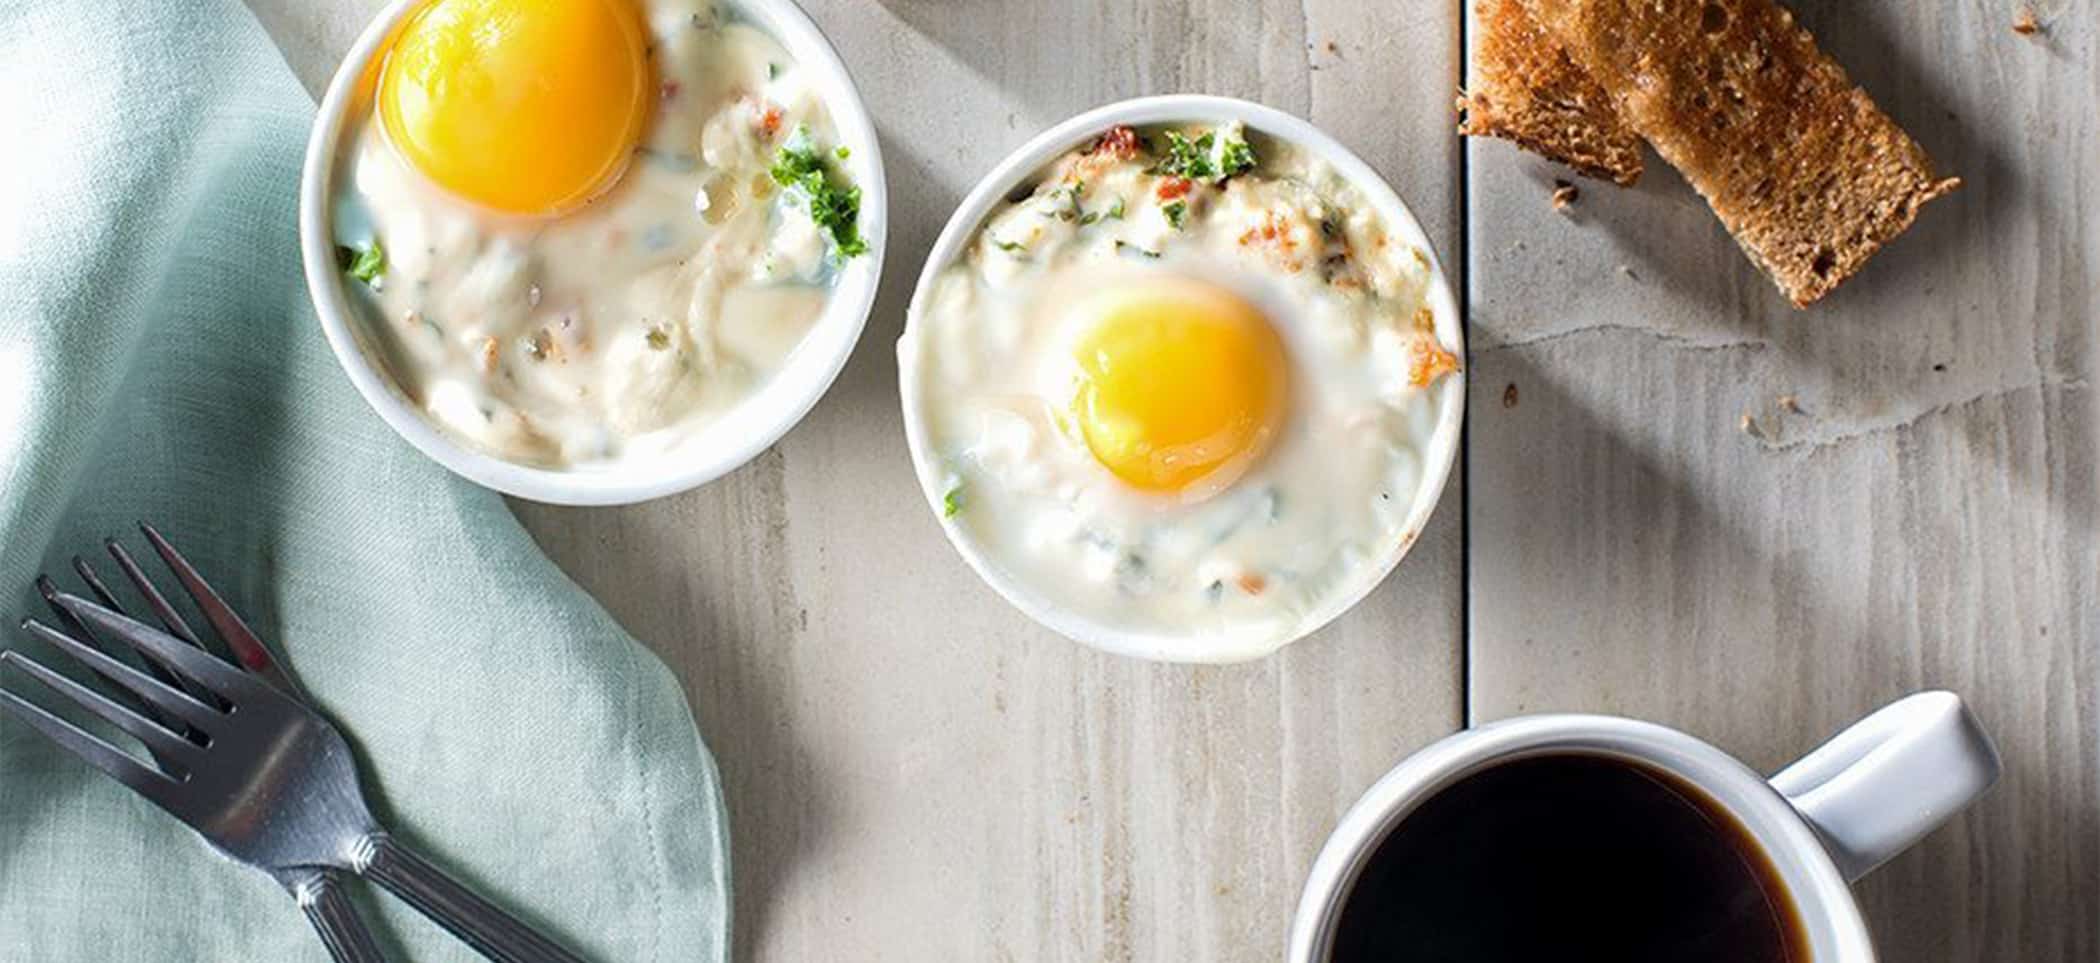 Baked Eggs with Kale & Ricotta